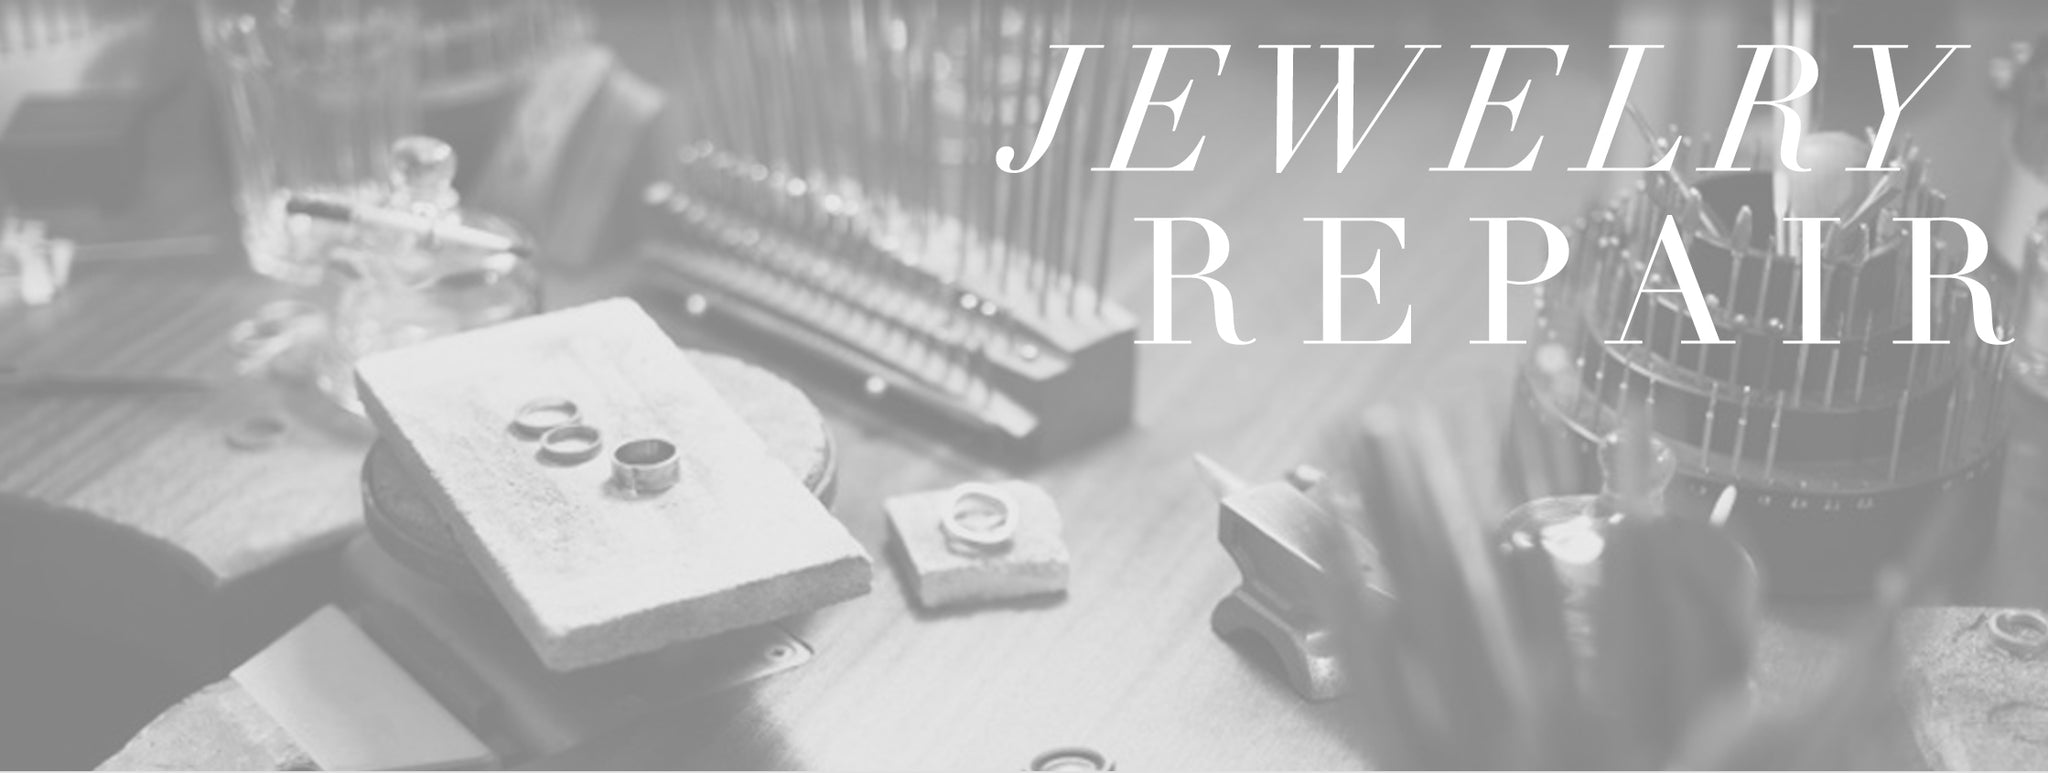 Jewelry Repair Services in NY  Professional Jewelry Repair - Dr Jeweler